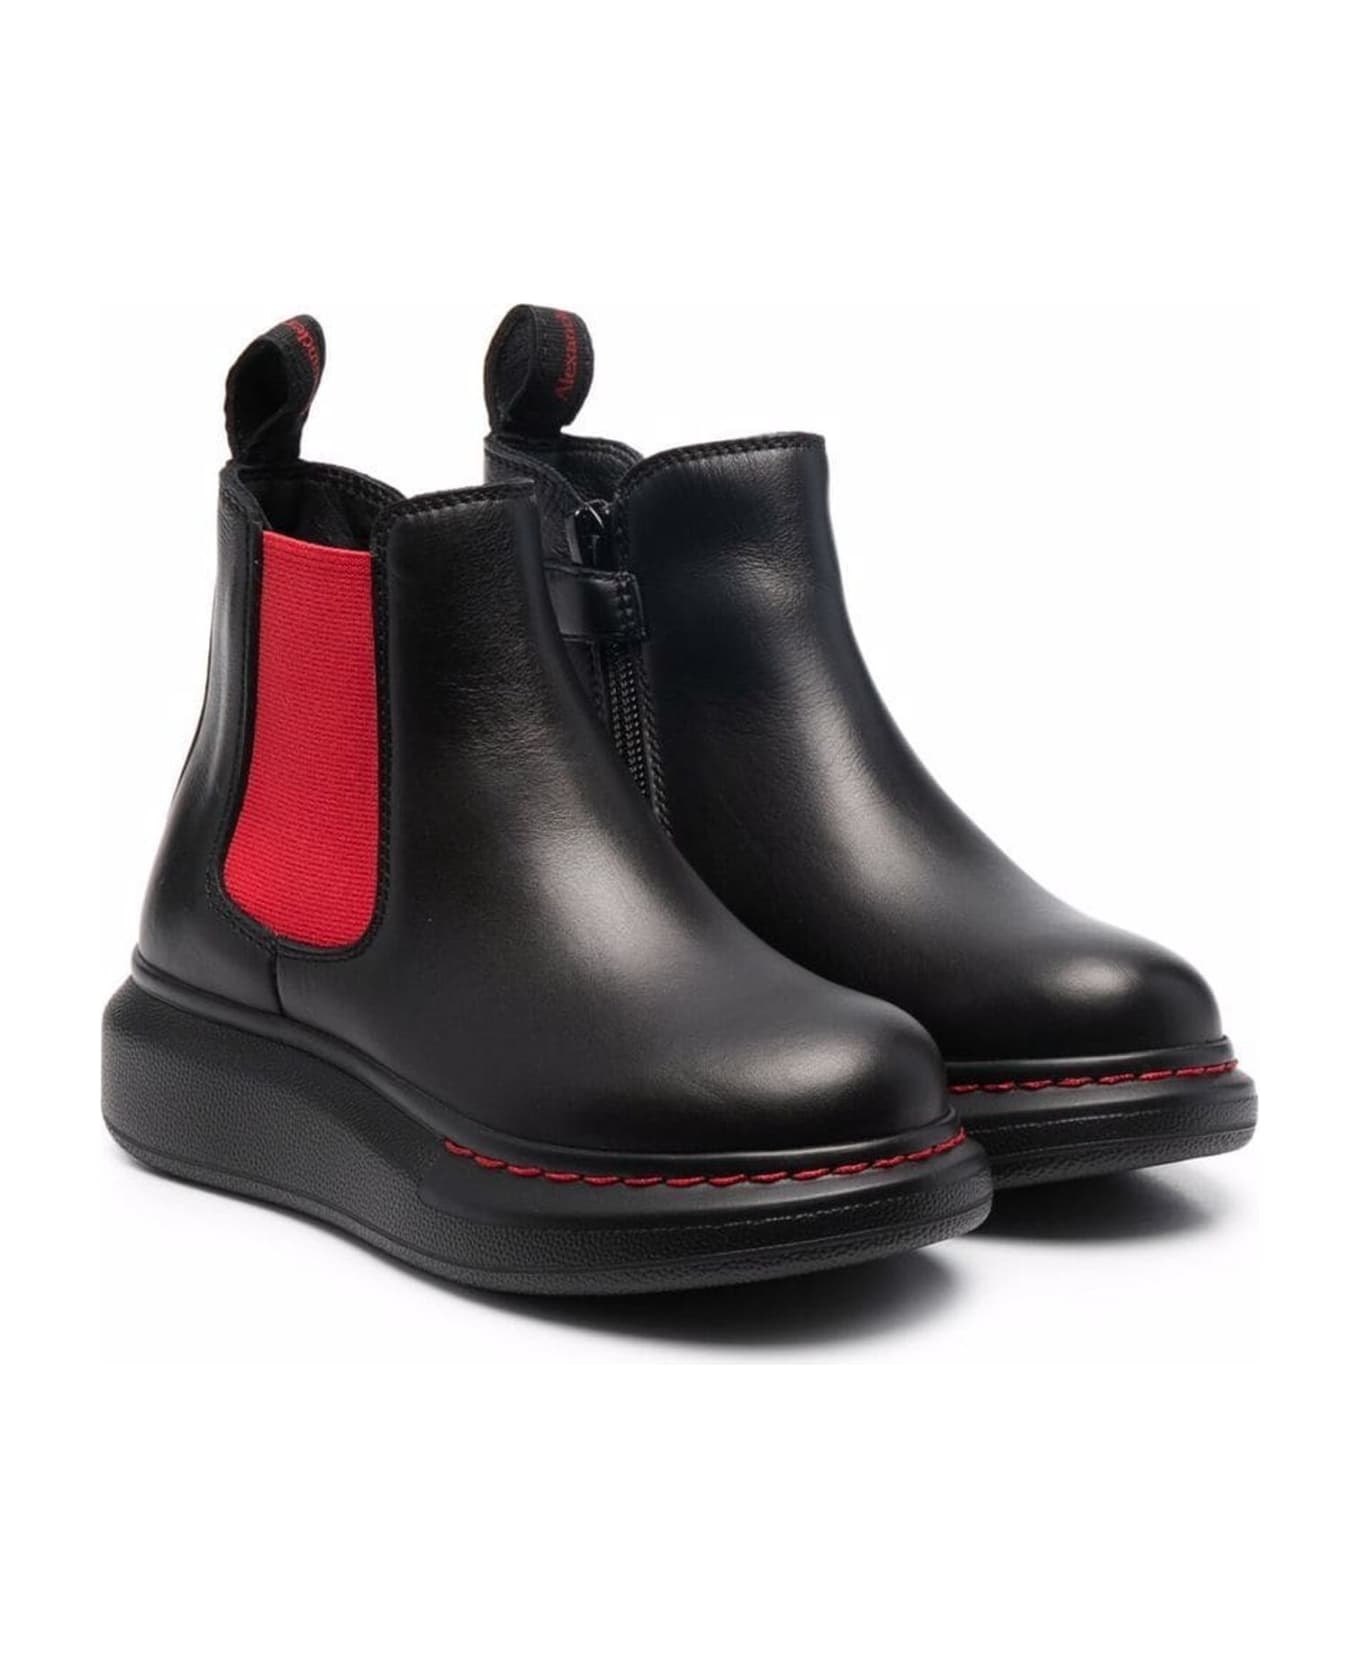 Alexander McQueen Black Leather Ankle Boots - Nero